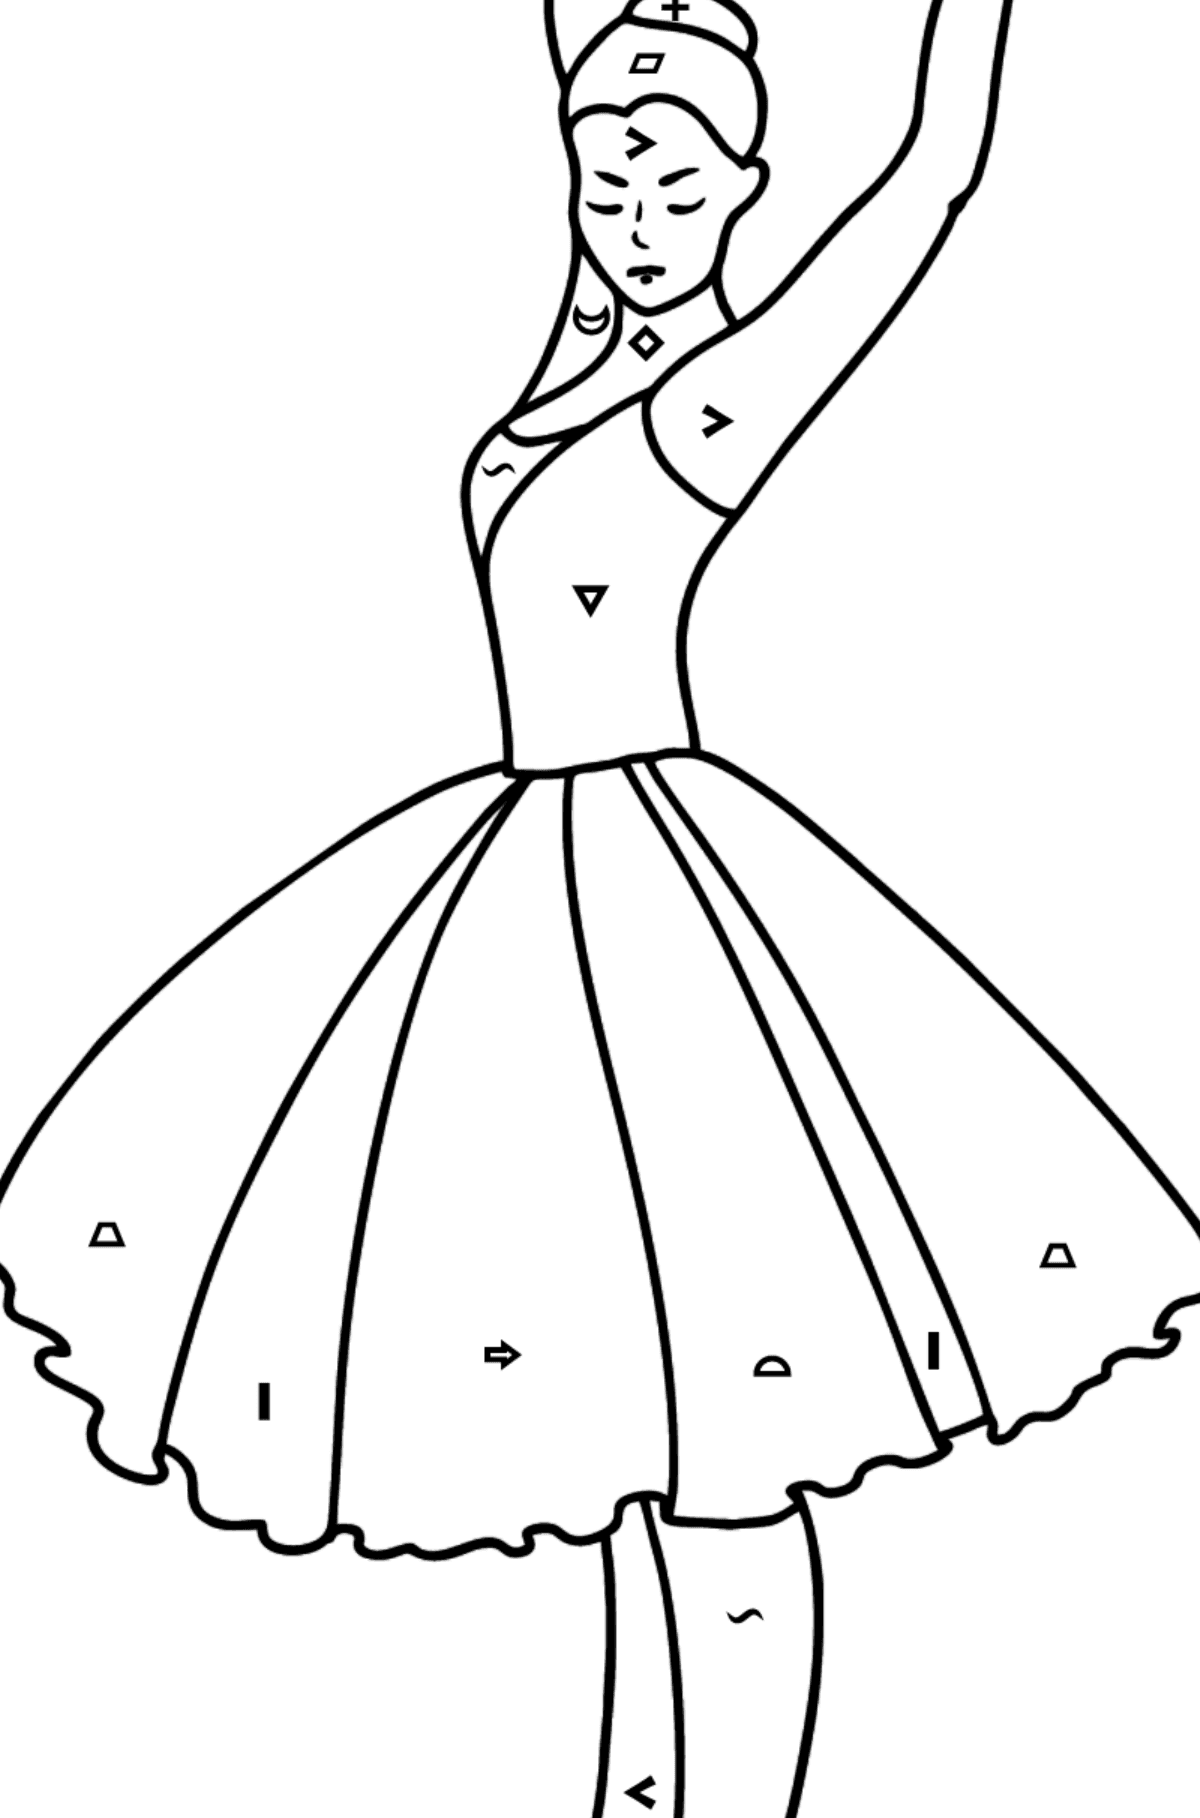 Ballerina Dancing coloring page - Coloring by Symbols and Geometric Shapes for Kids